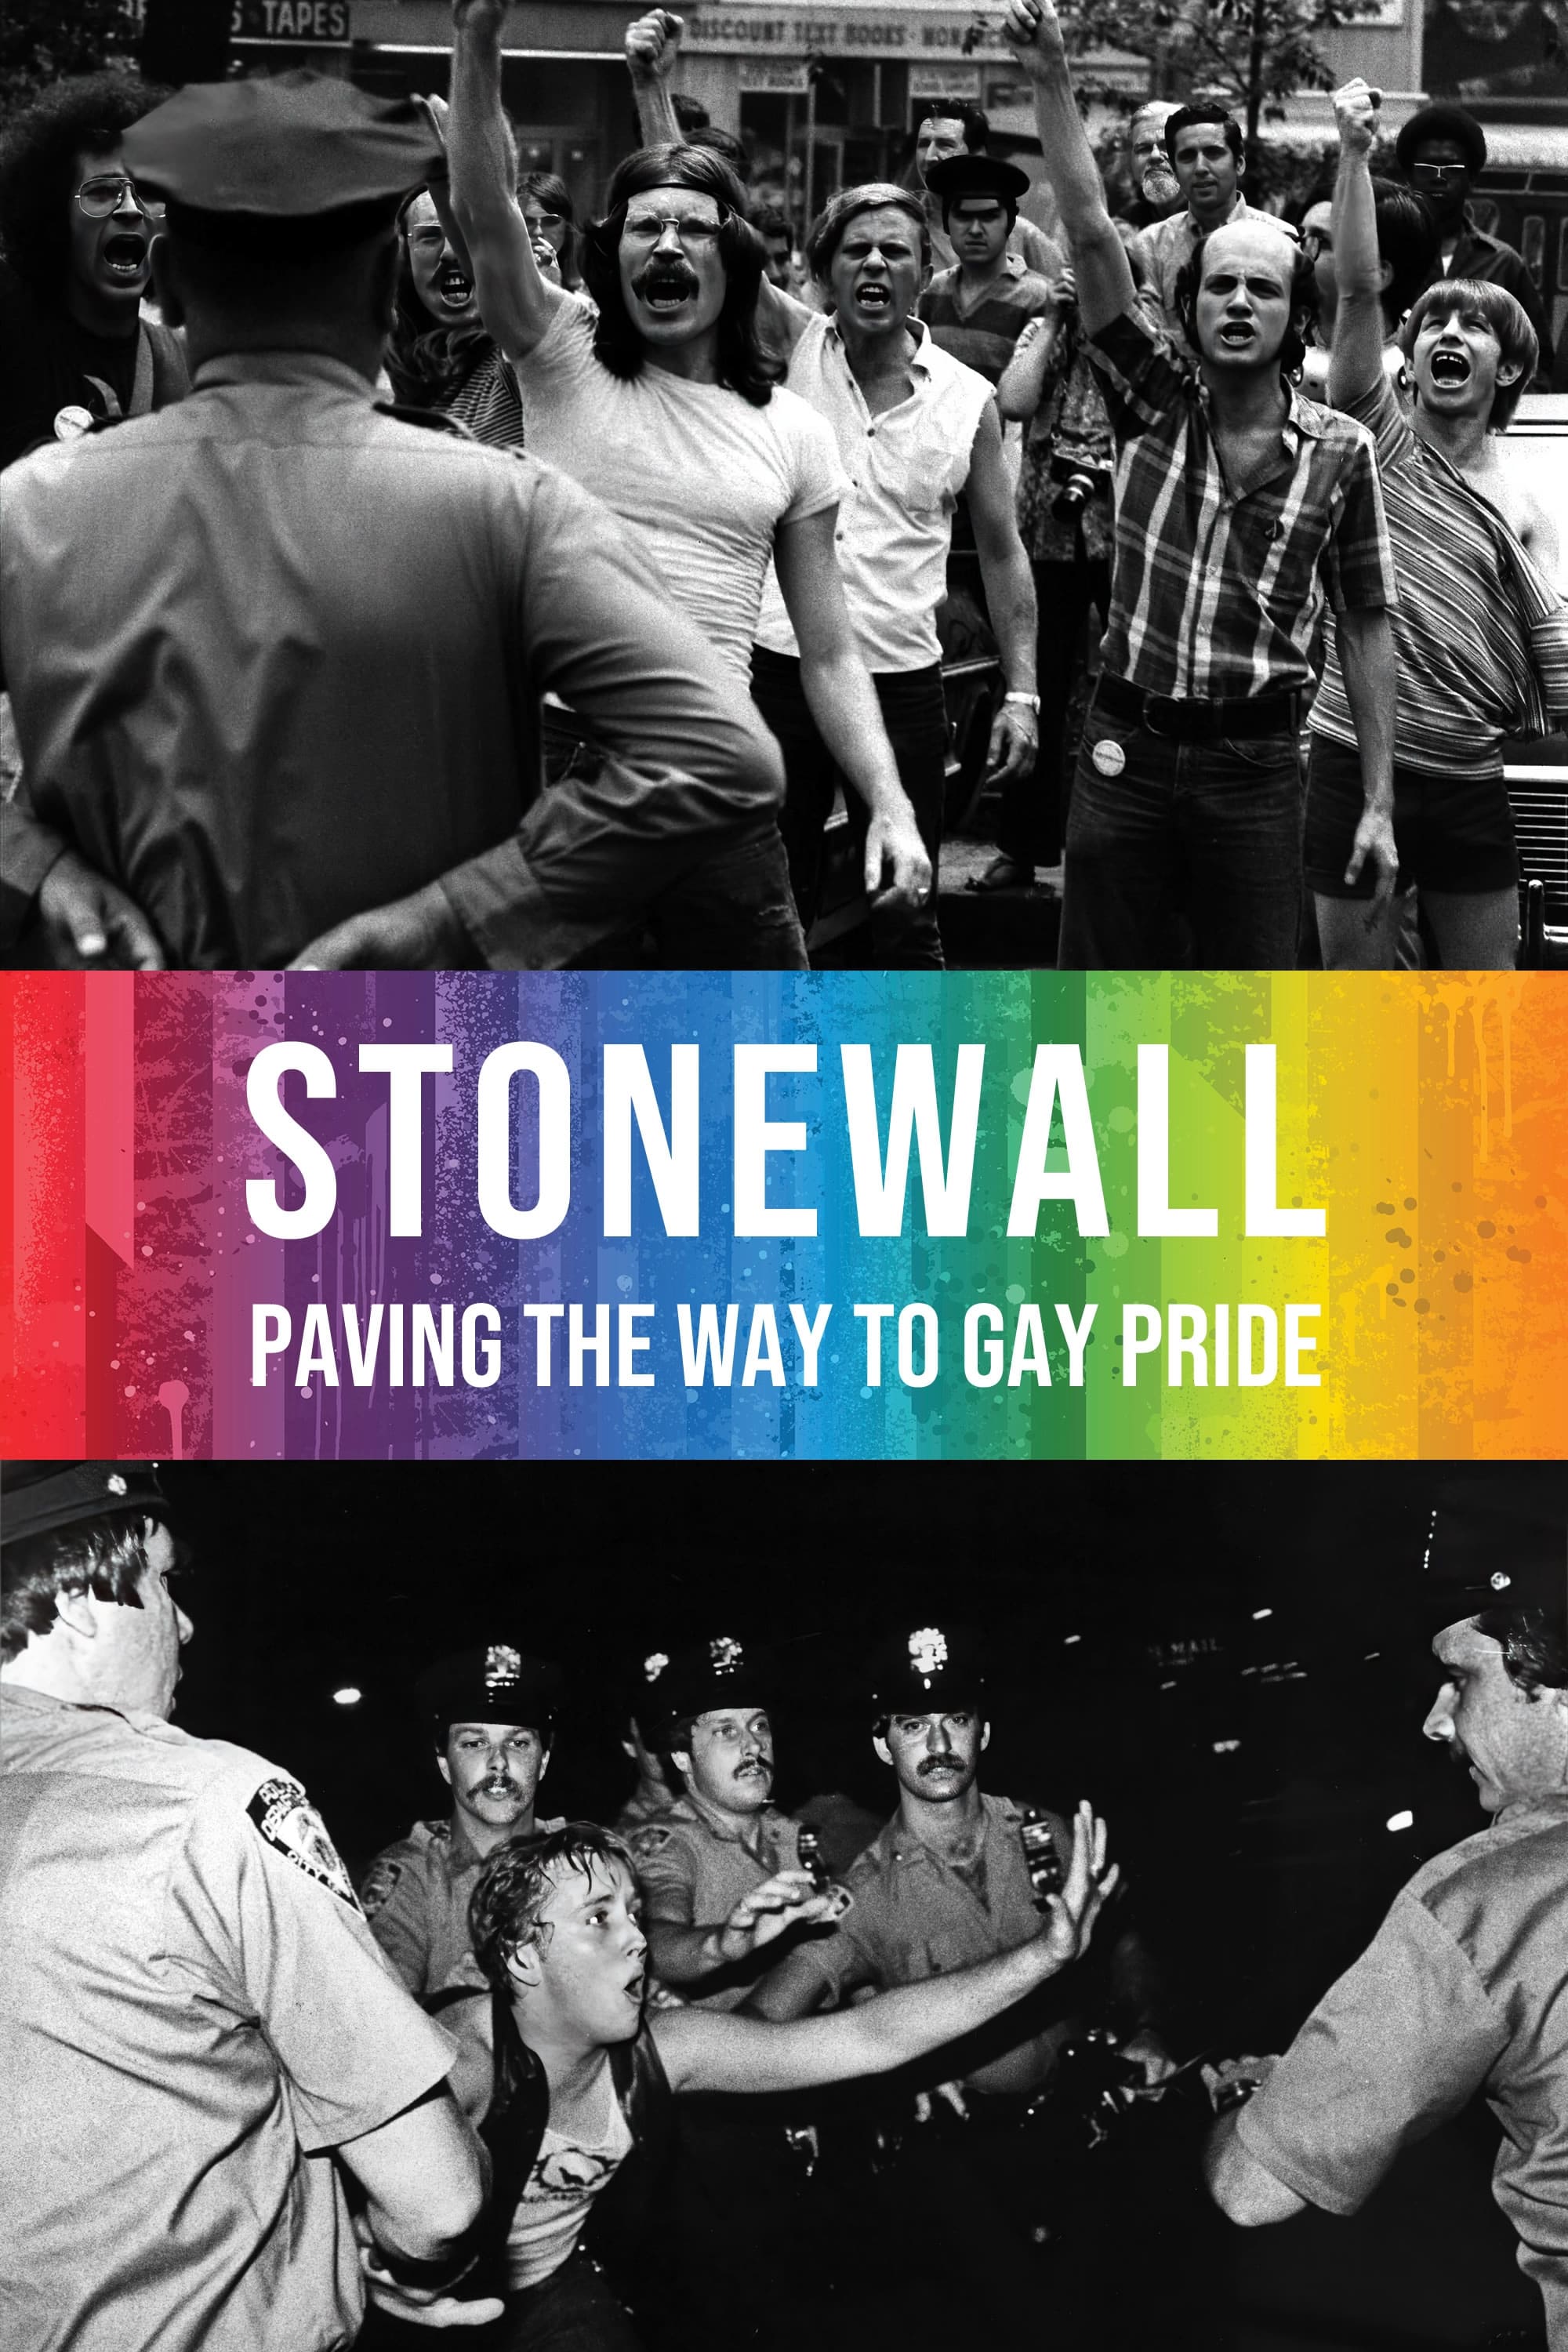 Stonewall: Paving the Way to Gay Pride